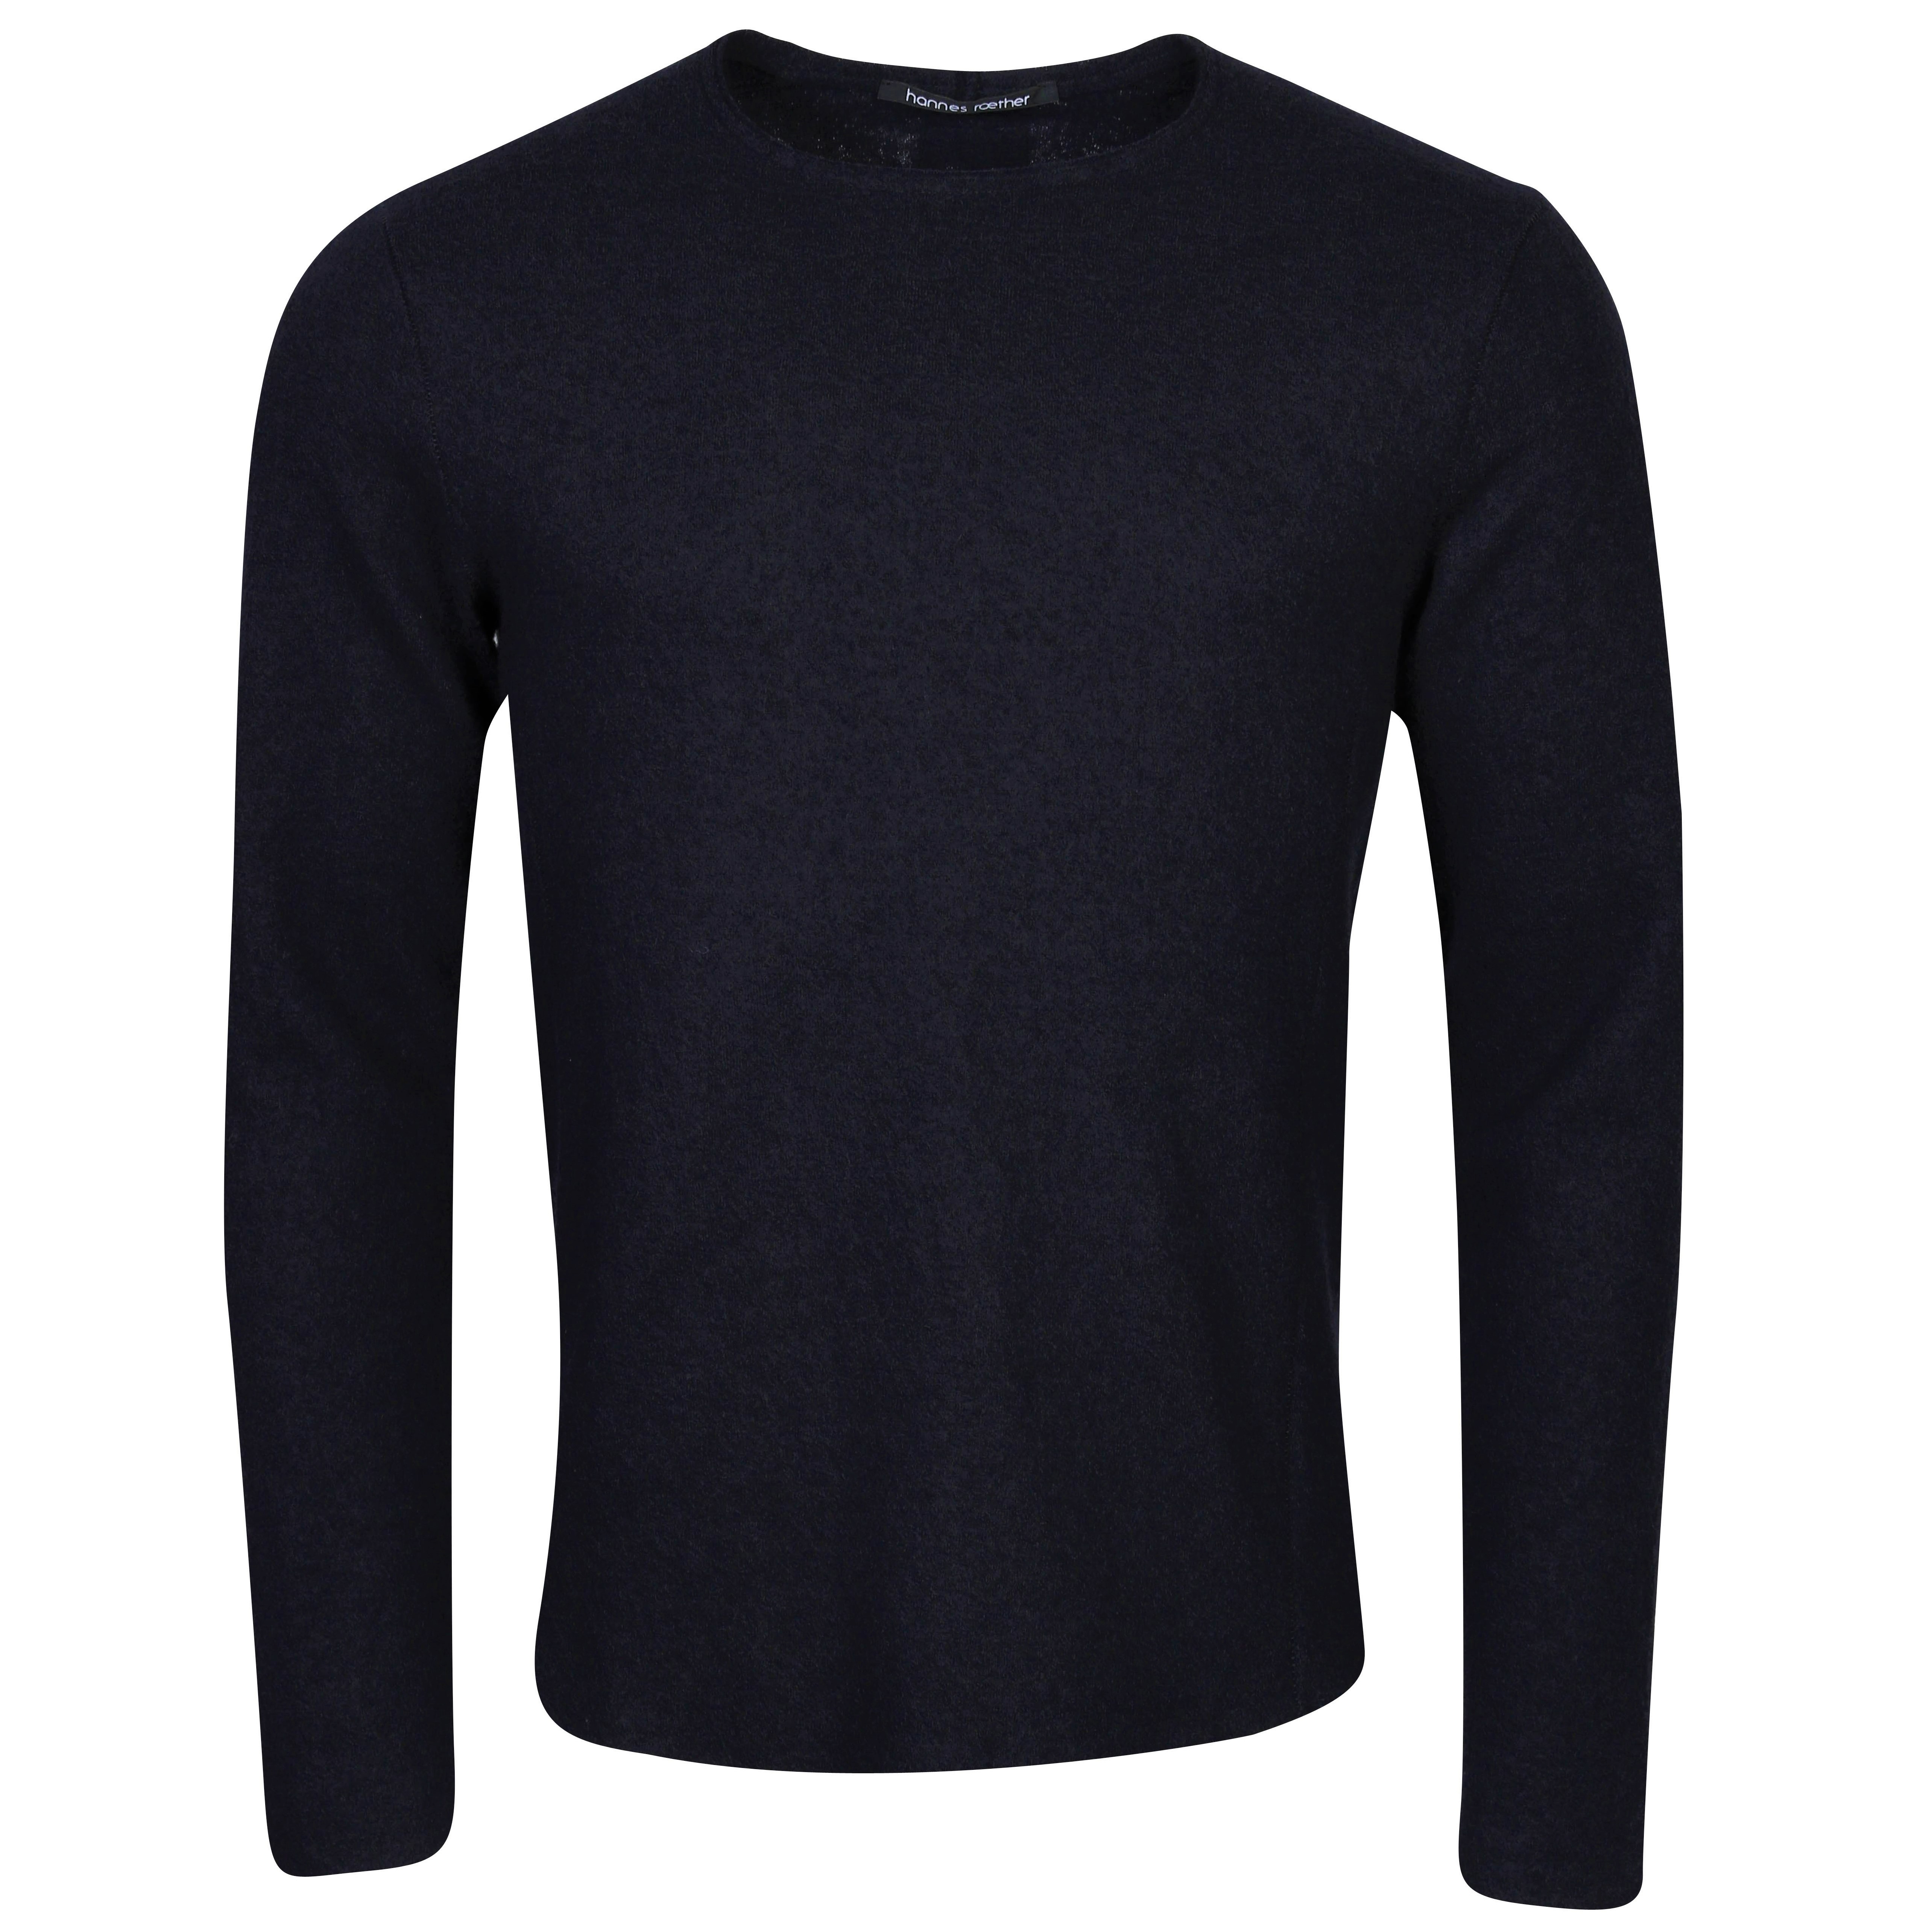 Hannes Roether Knit Pullover in Tornado